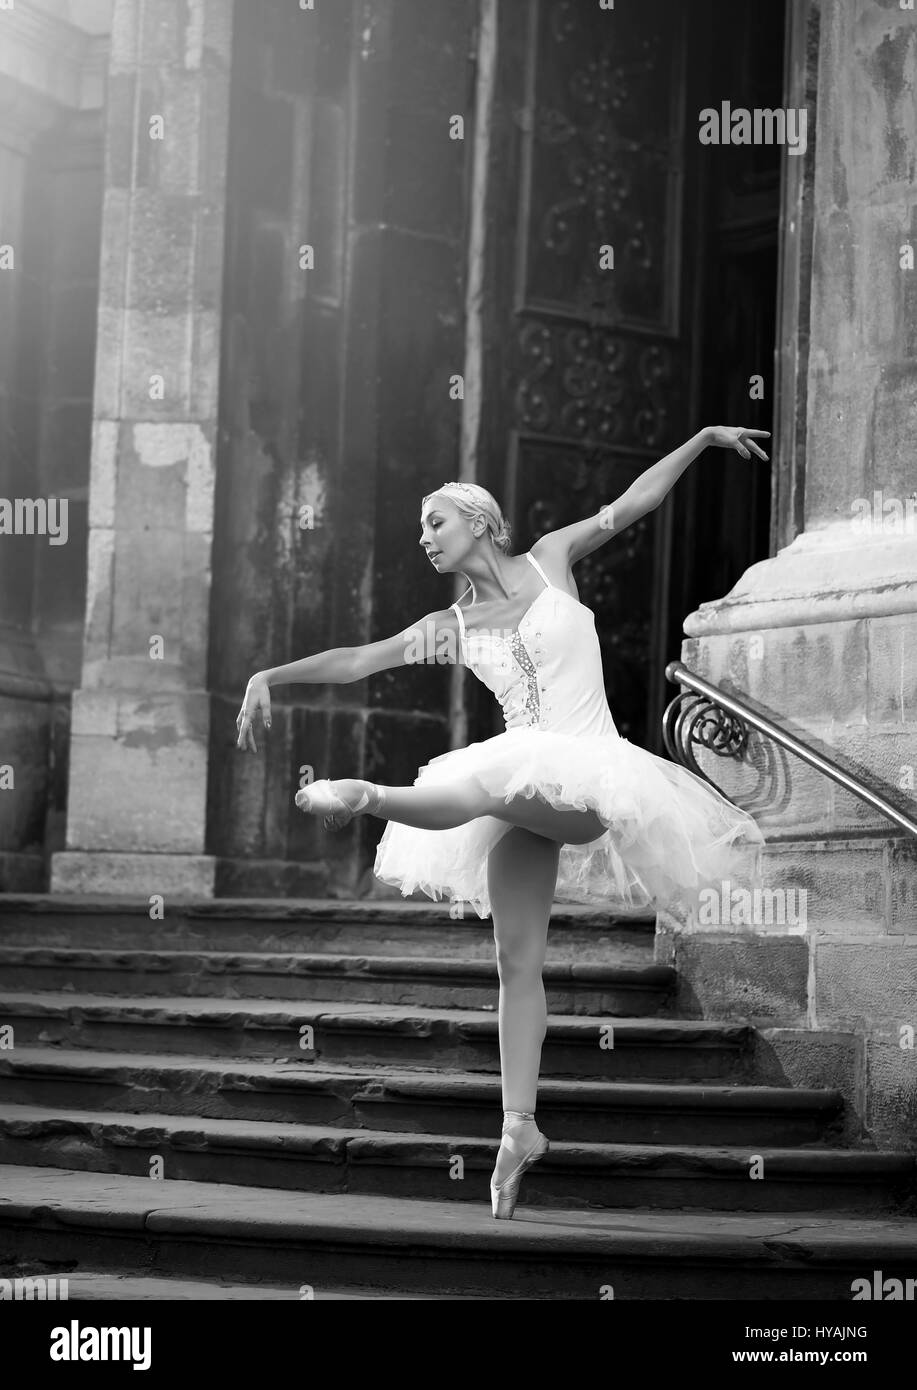 Young ballerina woman posing on stairs Stock Photo